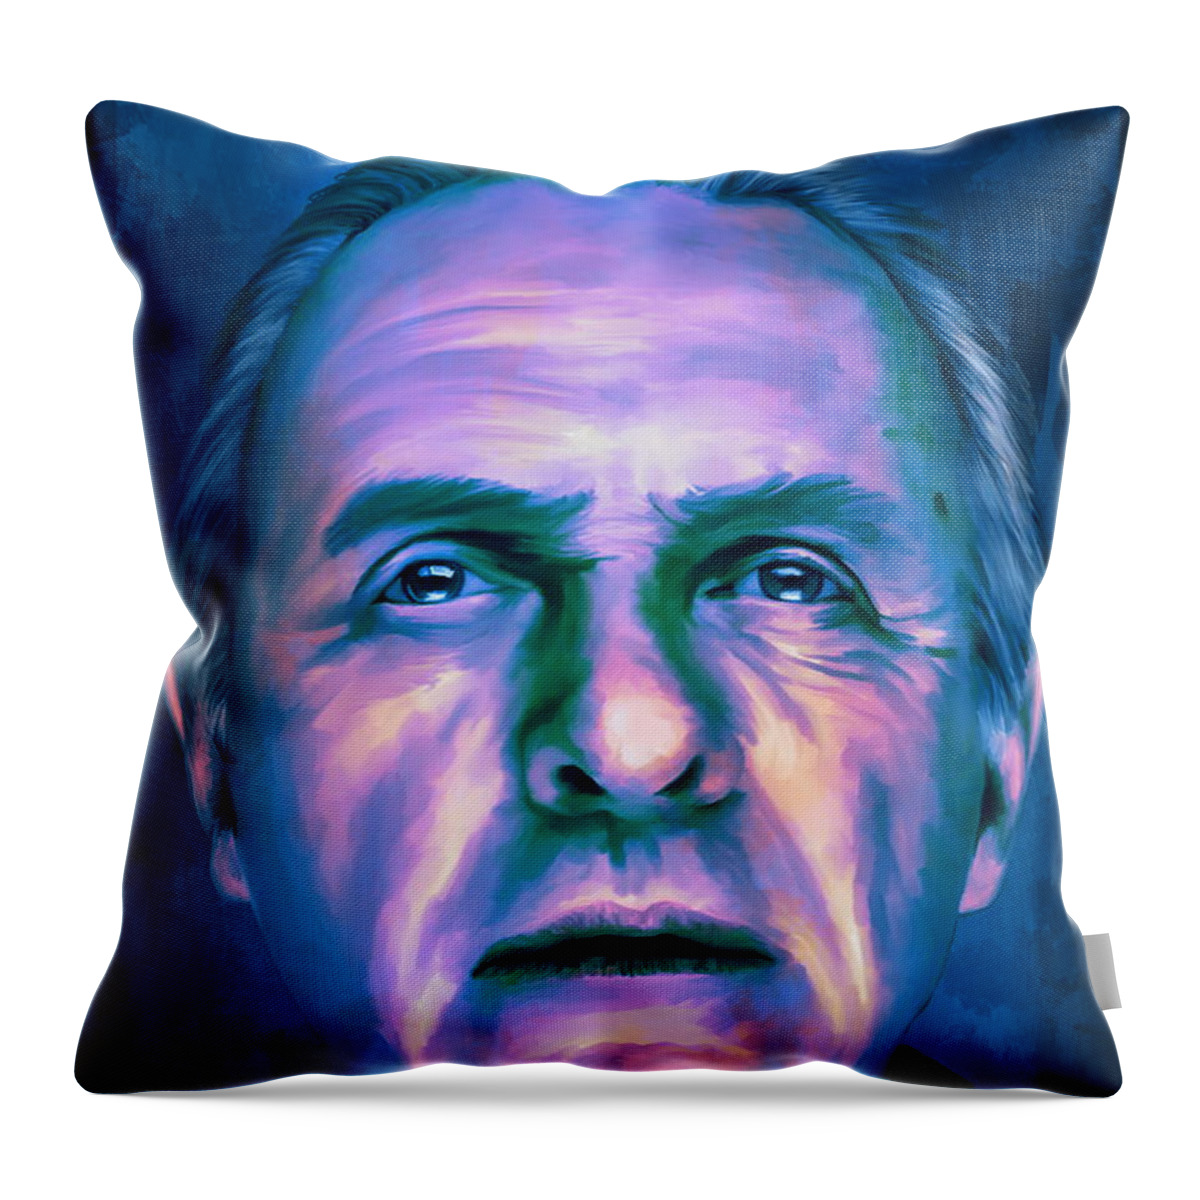 Anthony Throw Pillow featuring the painting Anthony by Andrzej Szczerski